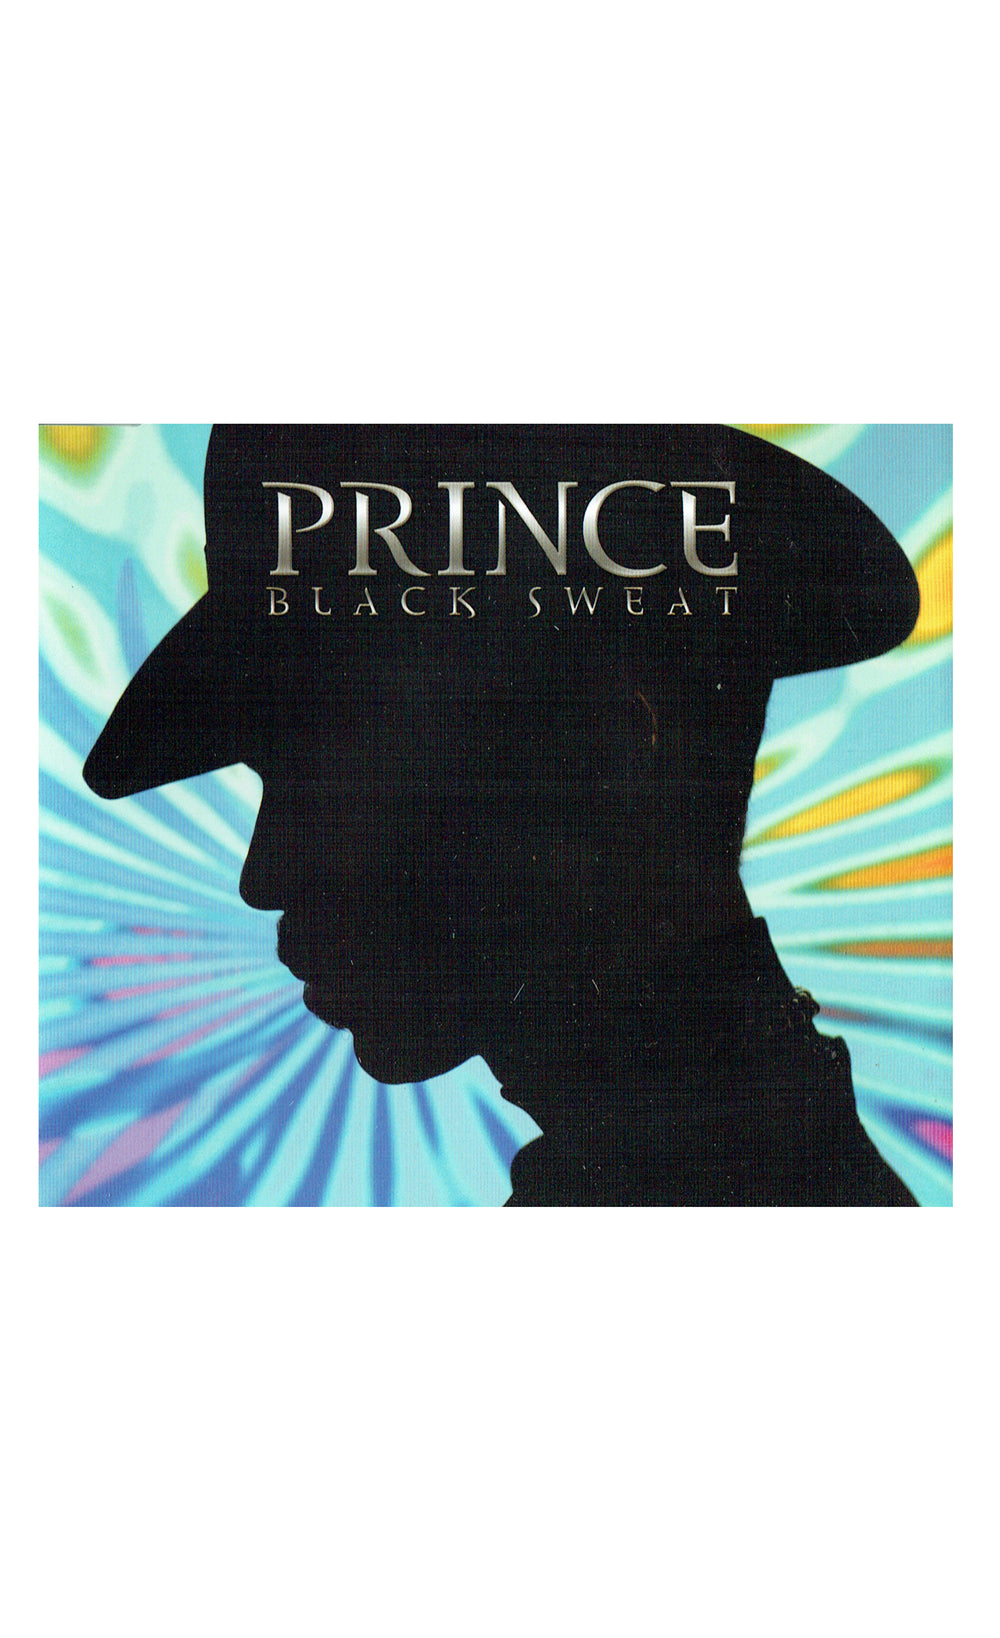 Prince – Black Sweat Enhanced Video 2006 Picture CD Single 3 Tracks Preowned: 2006